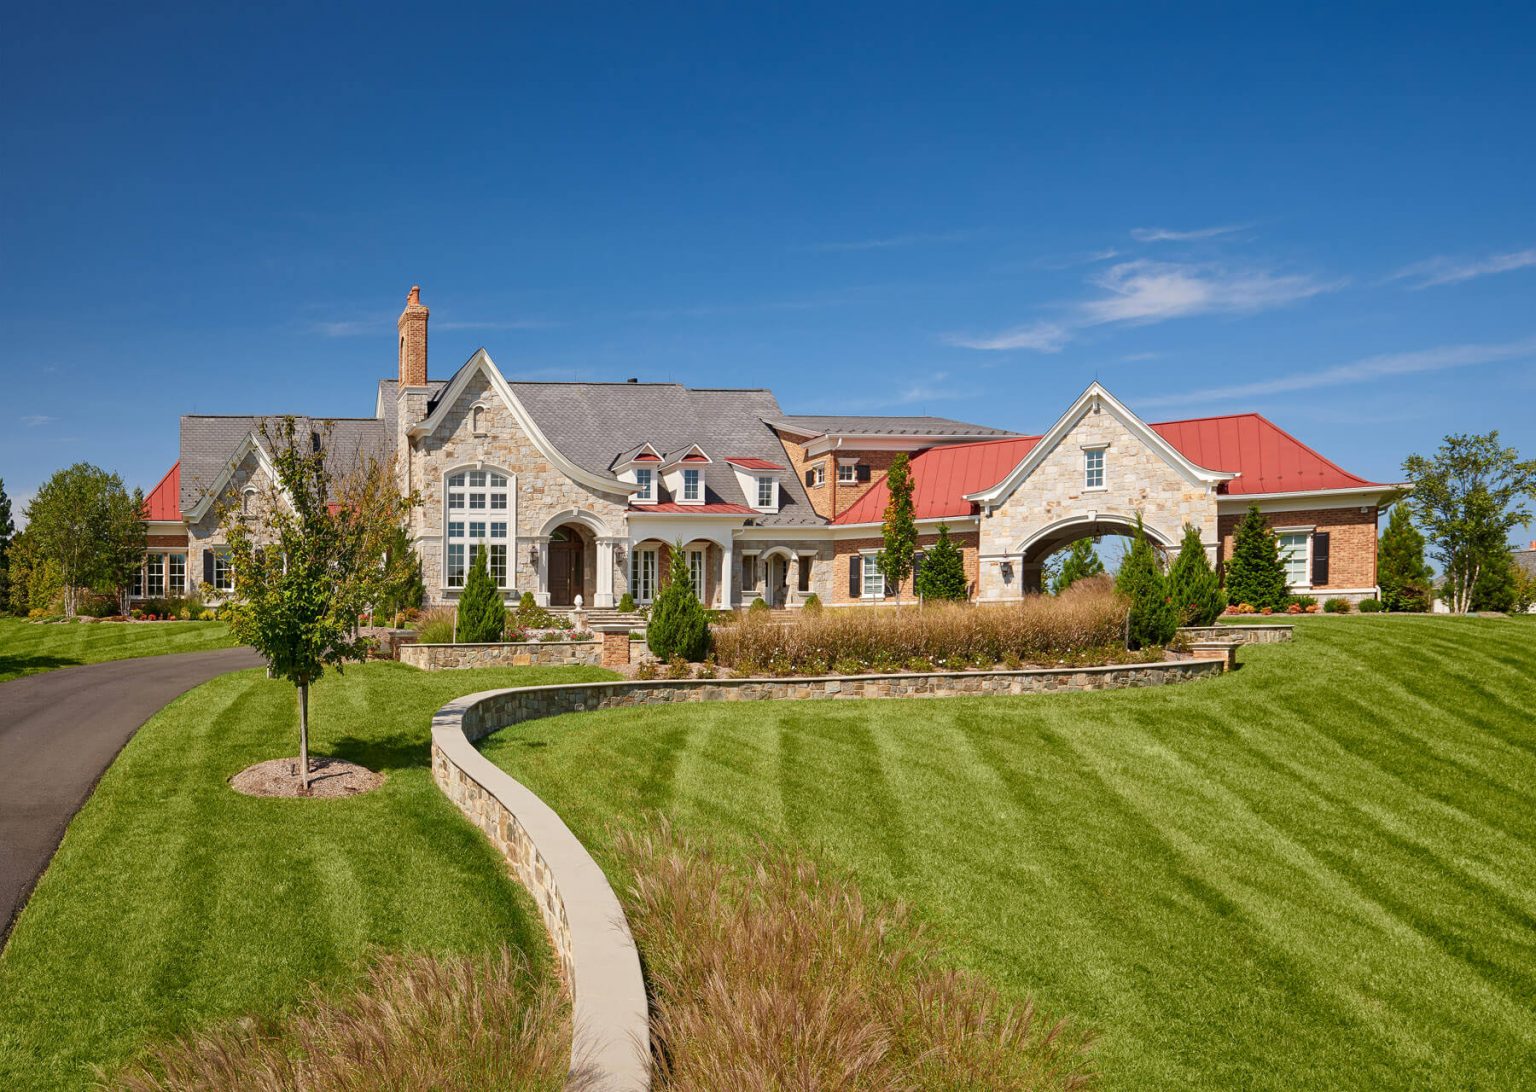 landscaped stonework villa home in gated community